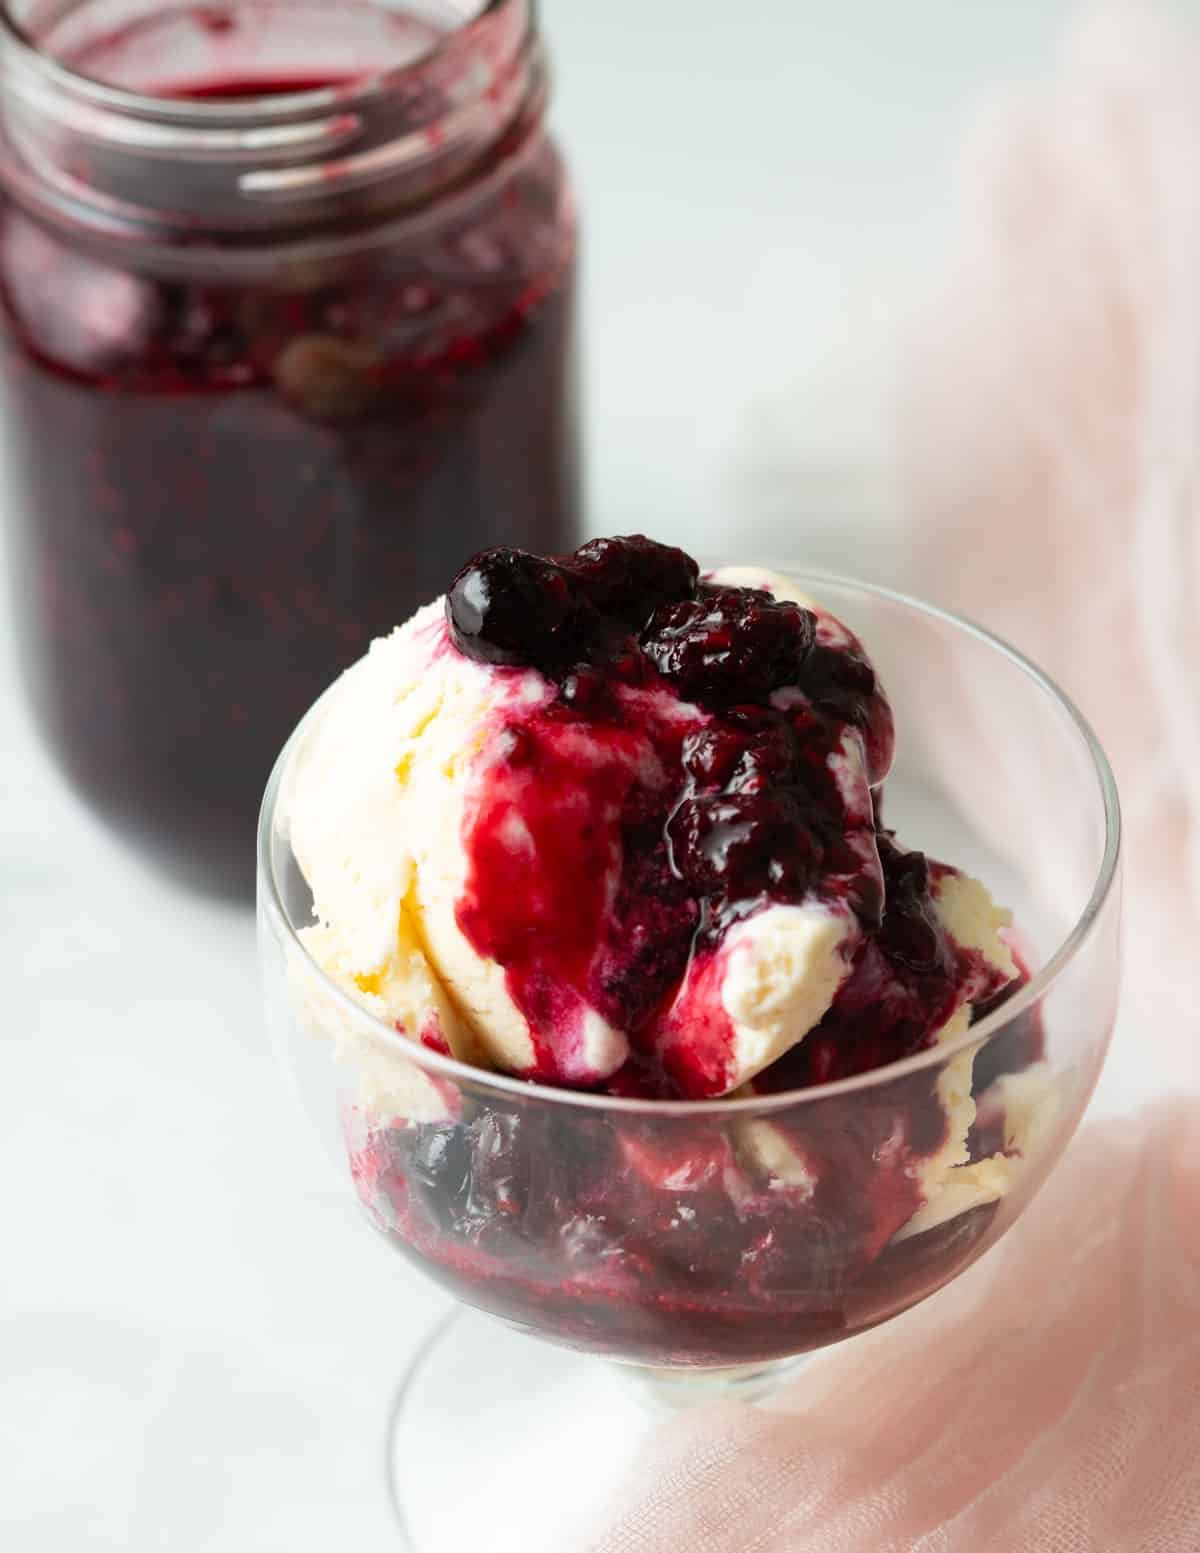 Berry compote in a jar beside vanilla ice cream topped with berry compote.
